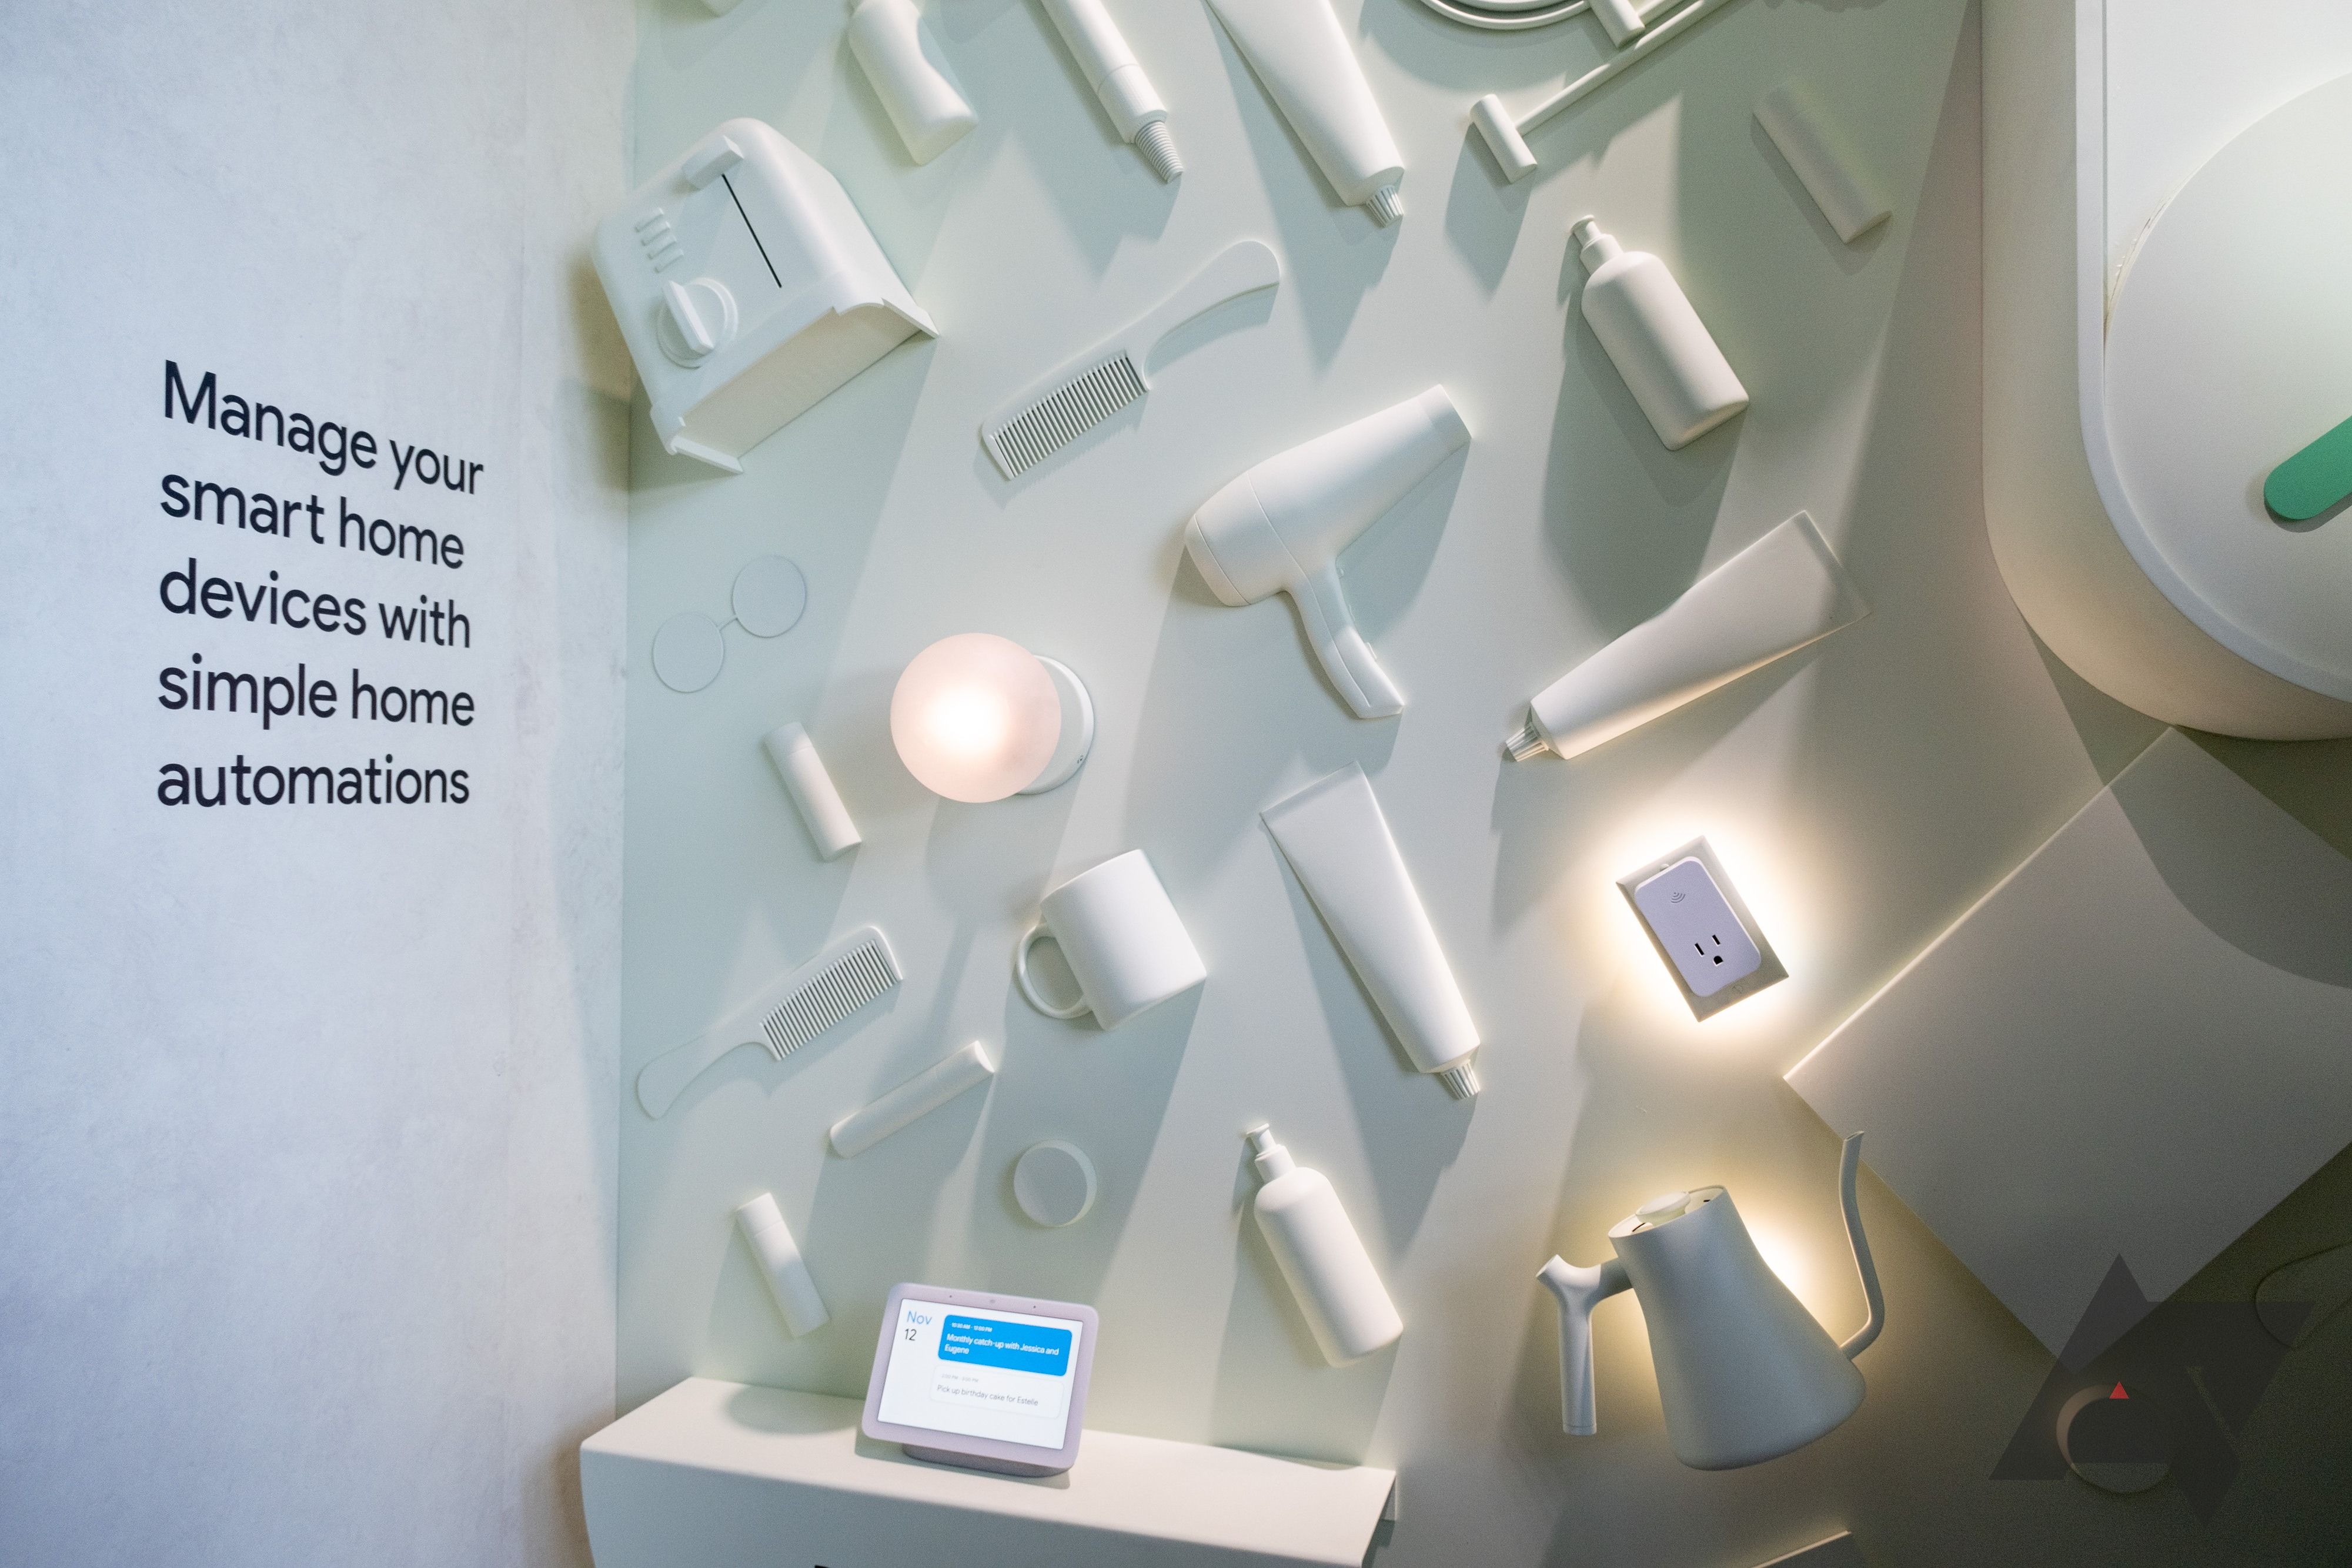 A wall-mounted display of smart devices